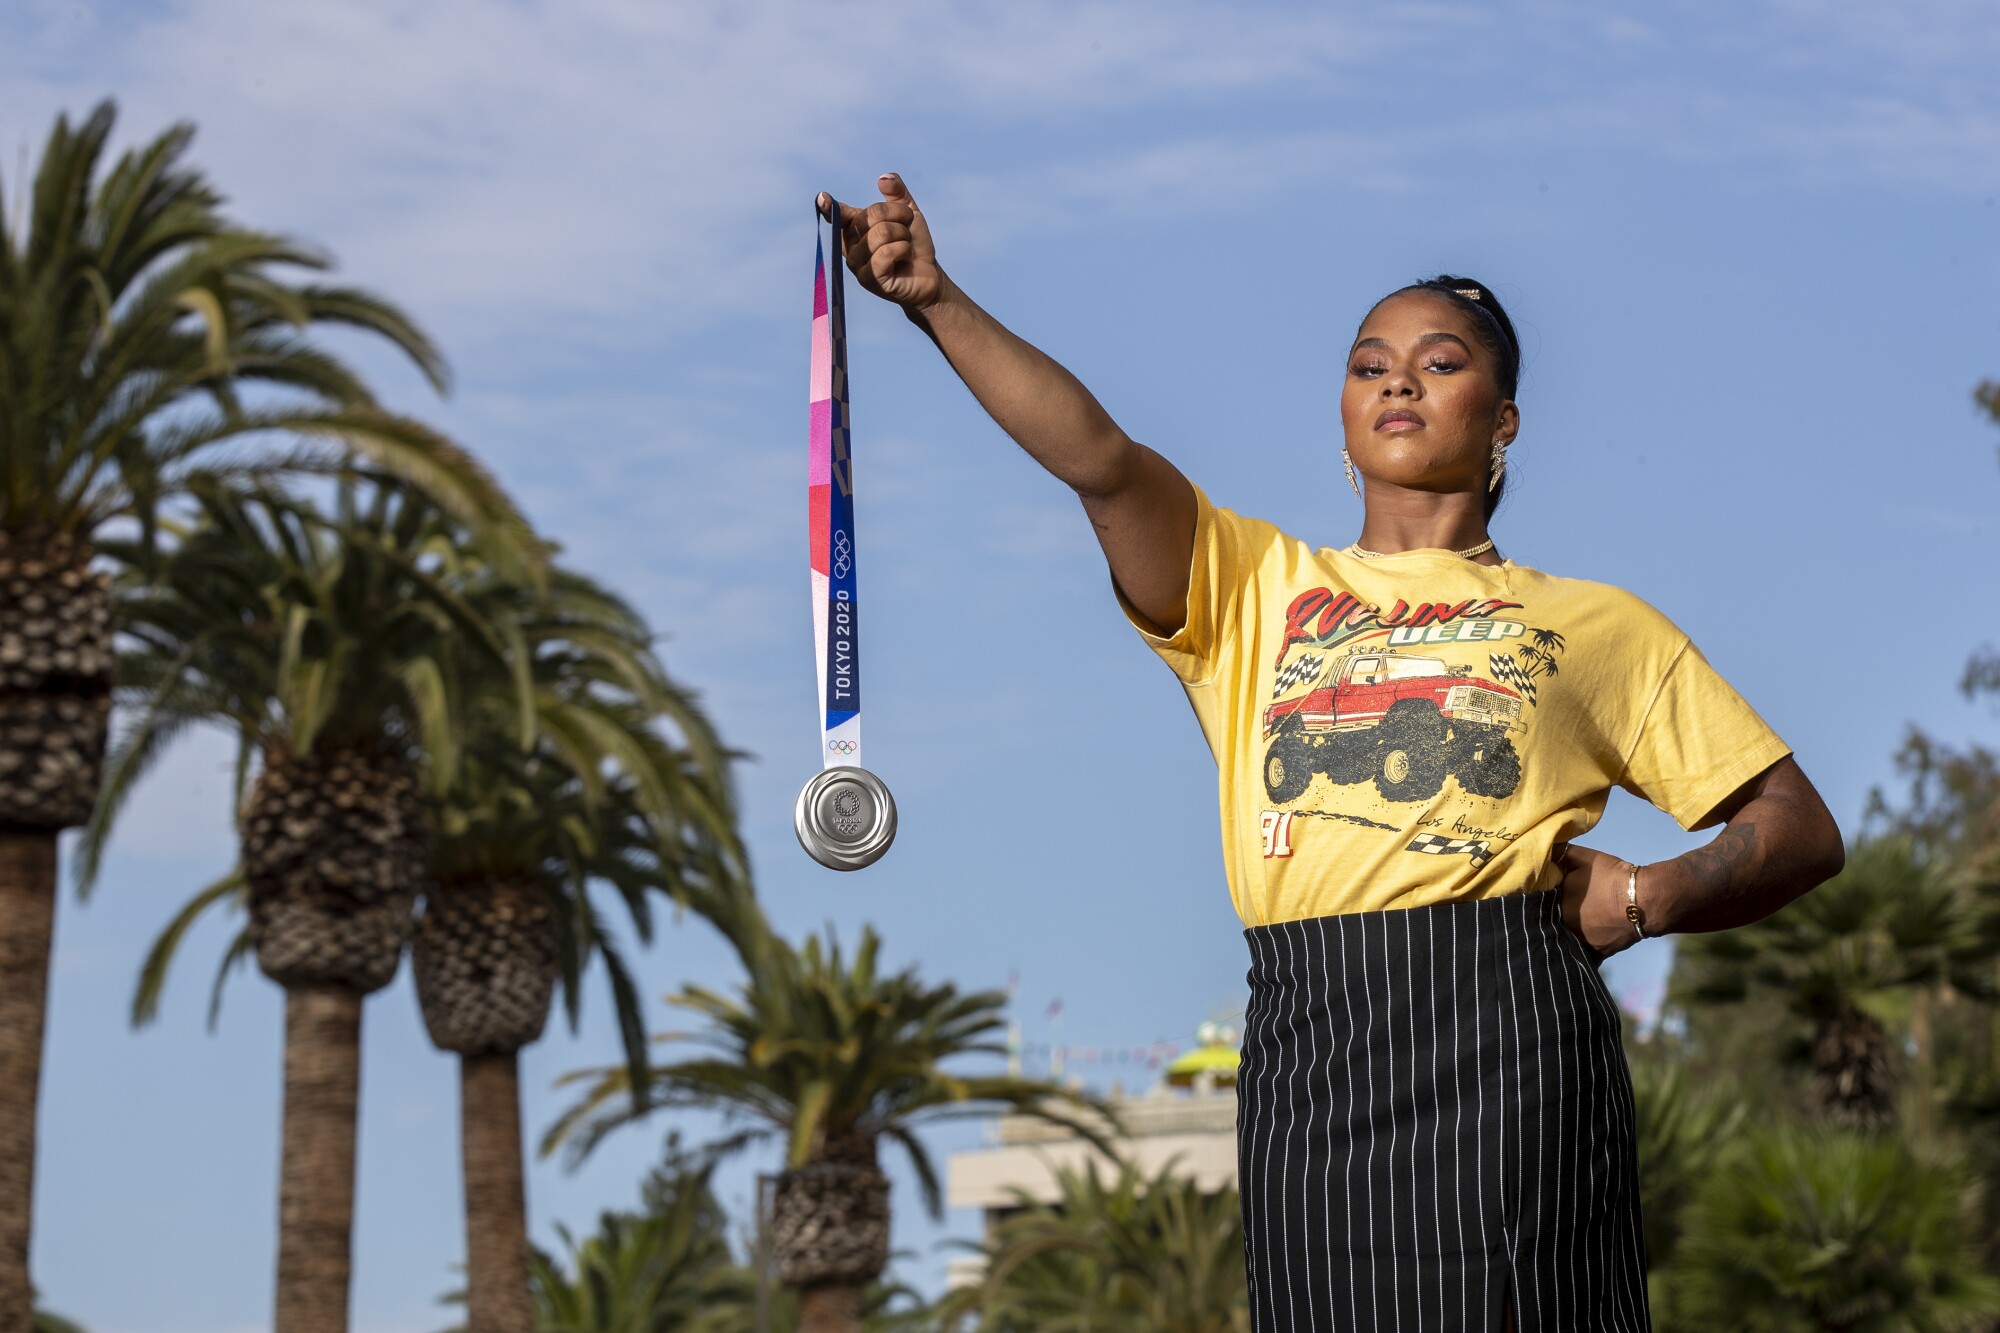 UCLA gymnast Jordan Chiles holds her Olympic silver medal 